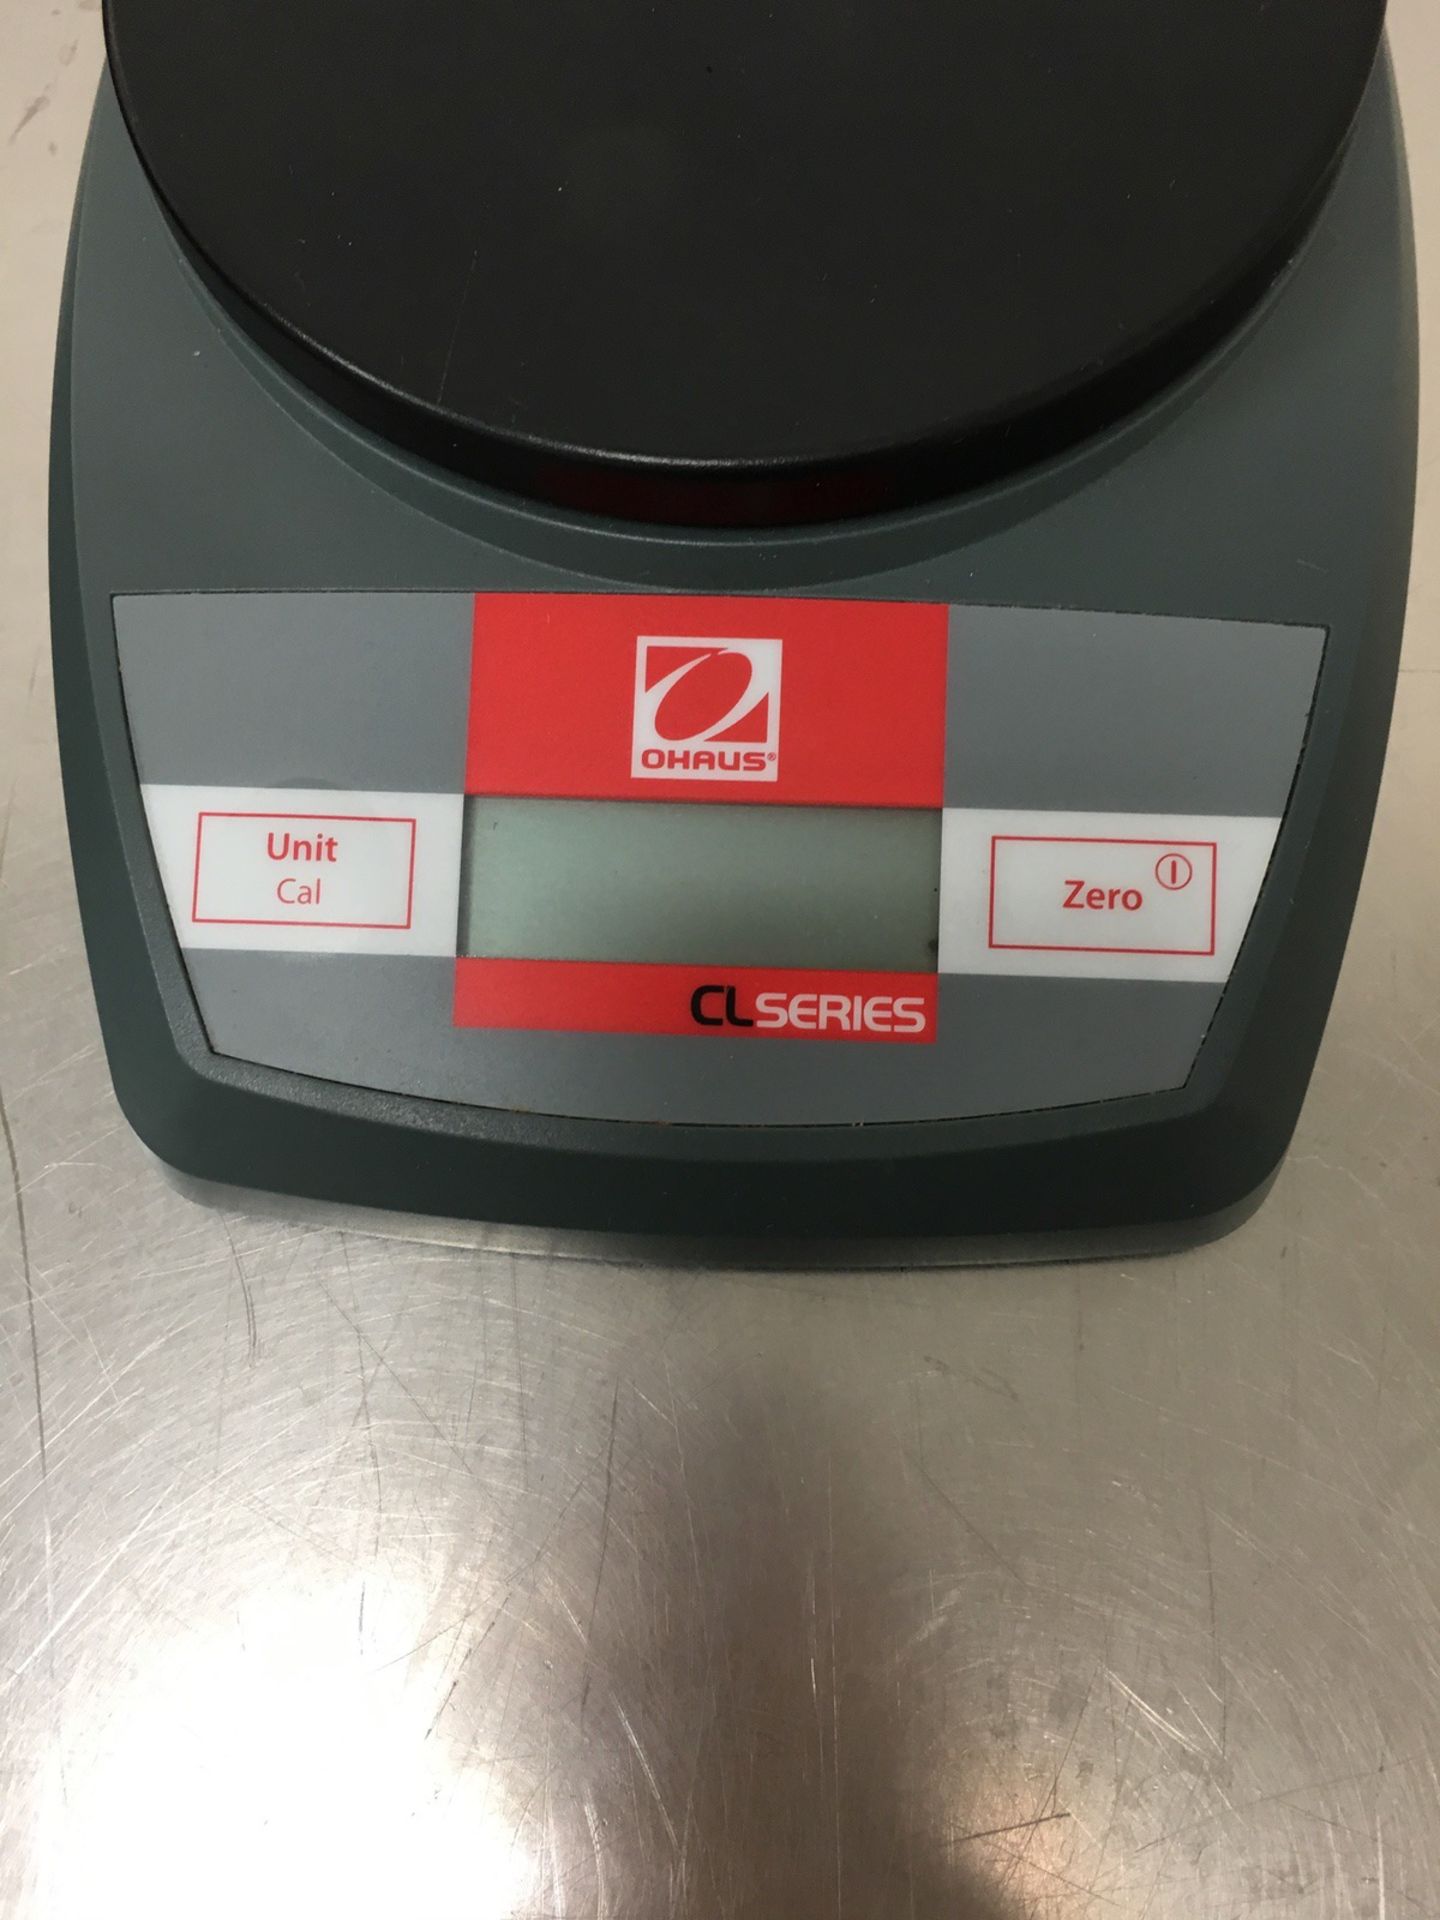 (3) Ohaus CL Series Digital Desktop Scales and (1) Escale Digital Desktop Scale | Rig Fee: No Charge - Image 2 of 3